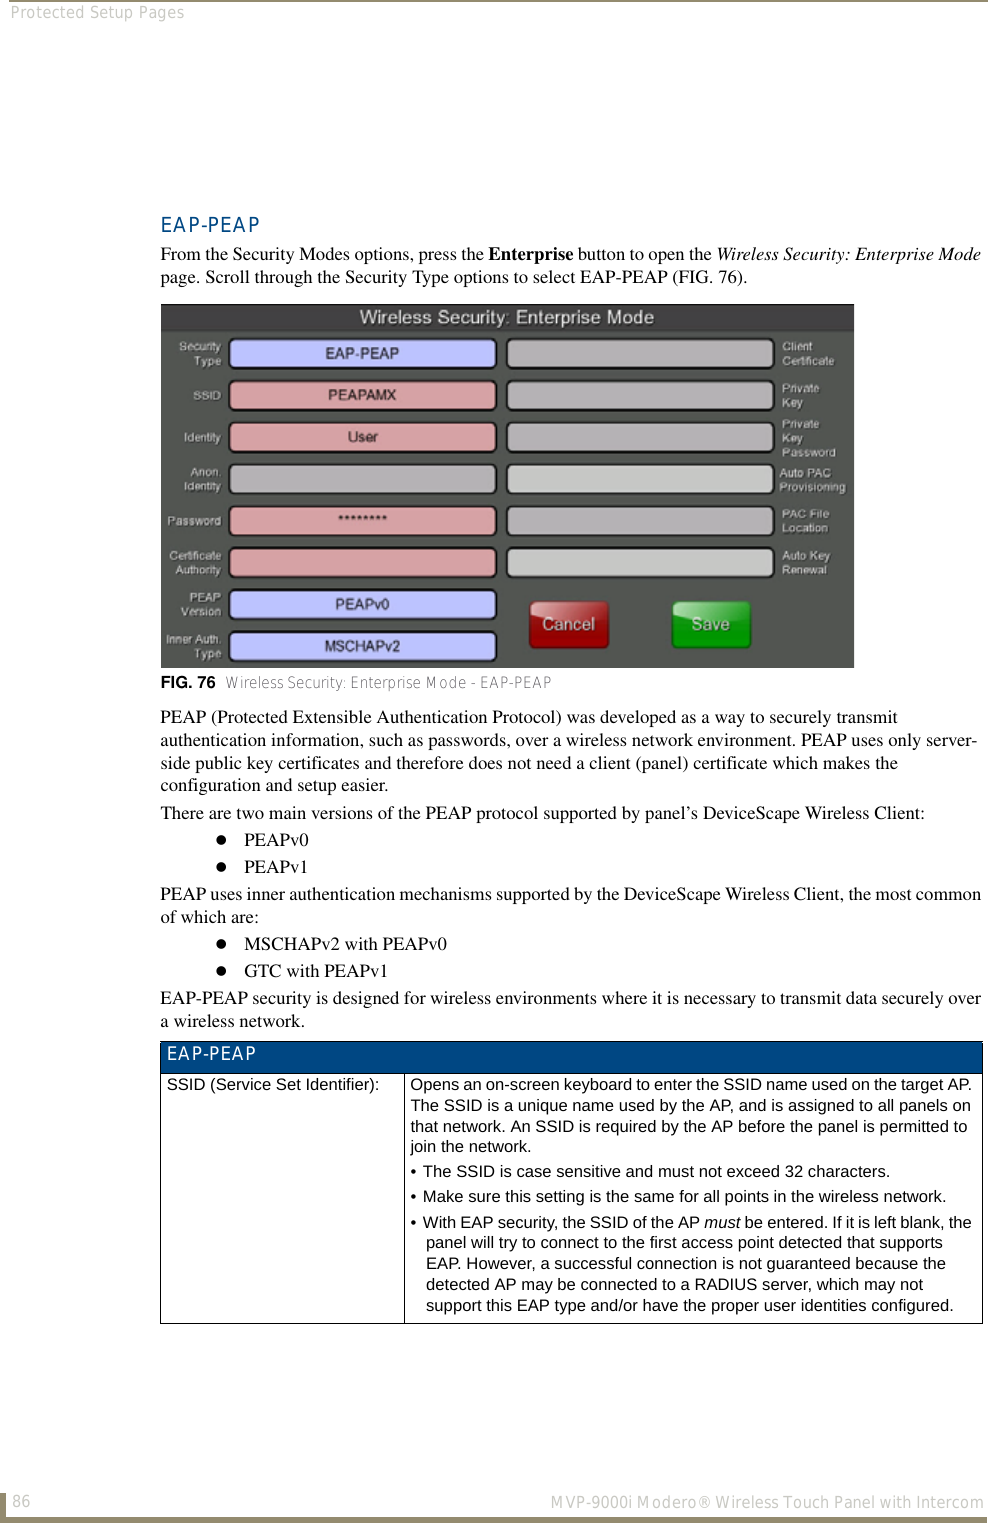 Protected Setup Pages86  MVP-9000i Modero® Wireless Touch Panel with IntercomEAP-PEAPFrom the Security Modes options, press the Enterprise button to open the Wireless Security: Enterprise Mode page. Scroll through the Security Type options to select EAP-PEAP (FIG. 76).        PEAP (Protected Extensible Authentication Protocol) was developed as a way to securely transmit authentication information, such as passwords, over a wireless network environment. PEAP uses only server-side public key certificates and therefore does not need a client (panel) certificate which makes the configuration and setup easier. There are two main versions of the PEAP protocol supported by panel’s DeviceScape Wireless Client: PEAPv0PEAPv1PEAP uses inner authentication mechanisms supported by the DeviceScape Wireless Client, the most common of which are: MSCHAPv2 with PEAPv0GTC with PEAPv1EAP-PEAP security is designed for wireless environments where it is necessary to transmit data securely over a wireless network. FIG. 76  Wireless Security: Enterprise Mode - EAP-PEAPEAP-PEAPSSID (Service Set Identifier): Opens an on-screen keyboard to enter the SSID name used on the target AP. The SSID is a unique name used by the AP, and is assigned to all panels on that network. An SSID is required by the AP before the panel is permitted to join the network. • The SSID is case sensitive and must not exceed 32 characters. • Make sure this setting is the same for all points in the wireless network.• With EAP security, the SSID of the AP must be entered. If it is left blank, the panel will try to connect to the first access point detected that supports EAP. However, a successful connection is not guaranteed because the detected AP may be connected to a RADIUS server, which may not support this EAP type and/or have the proper user identities configured.